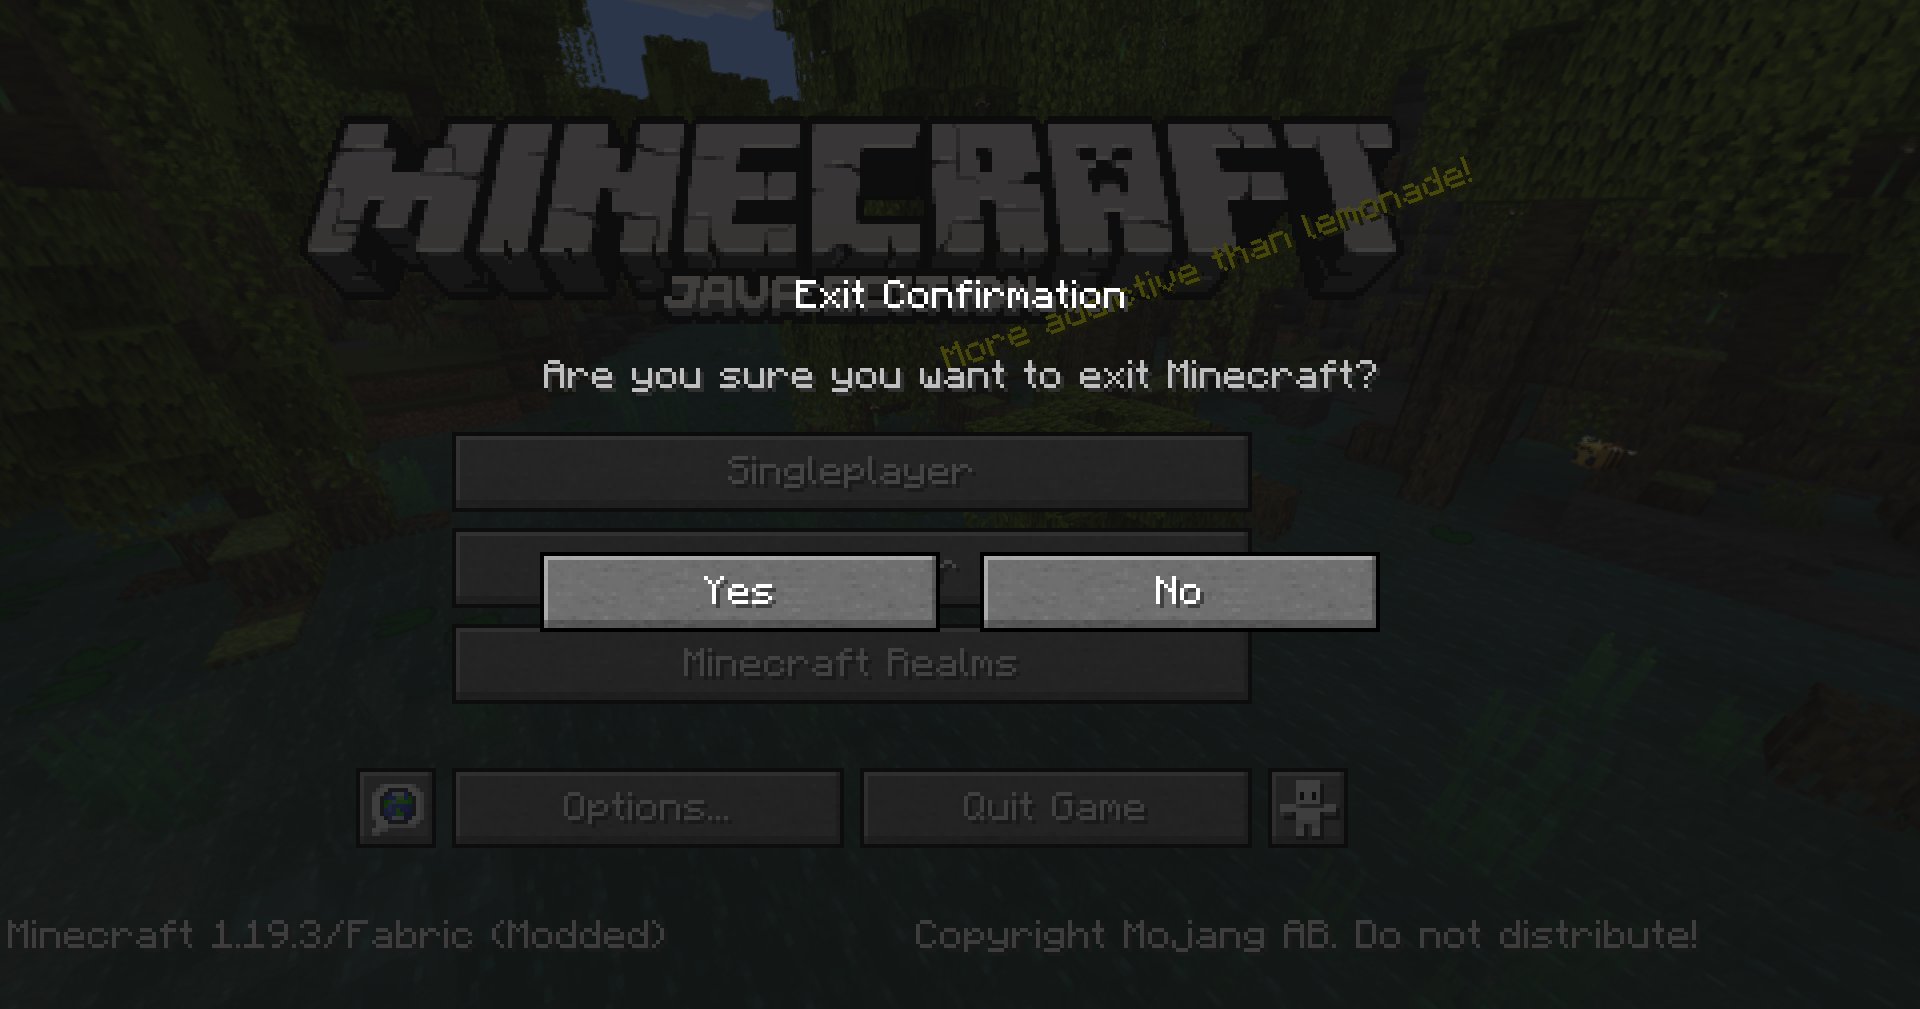 The exit confirmation screen at the title screen.